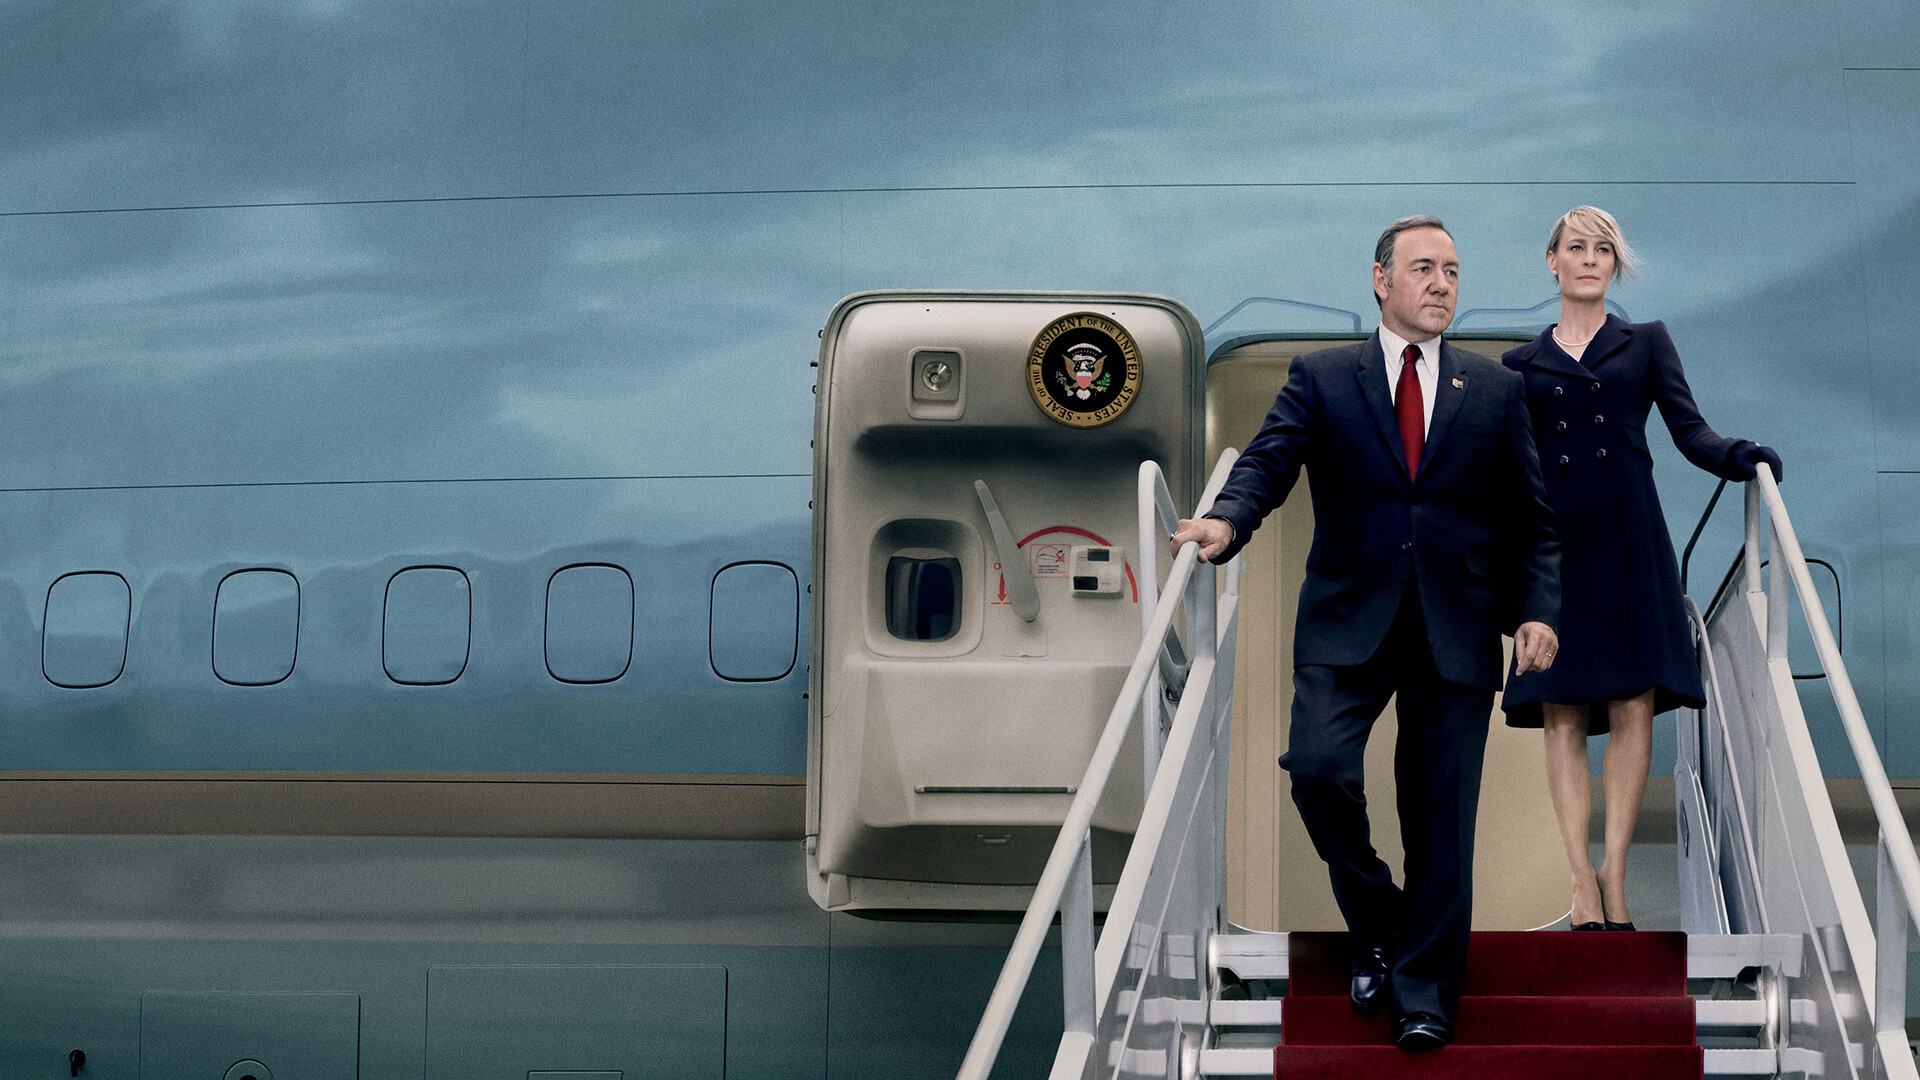 House of Cards: The sixth and final season was produced and released in 2018 without Kevin Spacey. 1920x1080 Full HD Background.